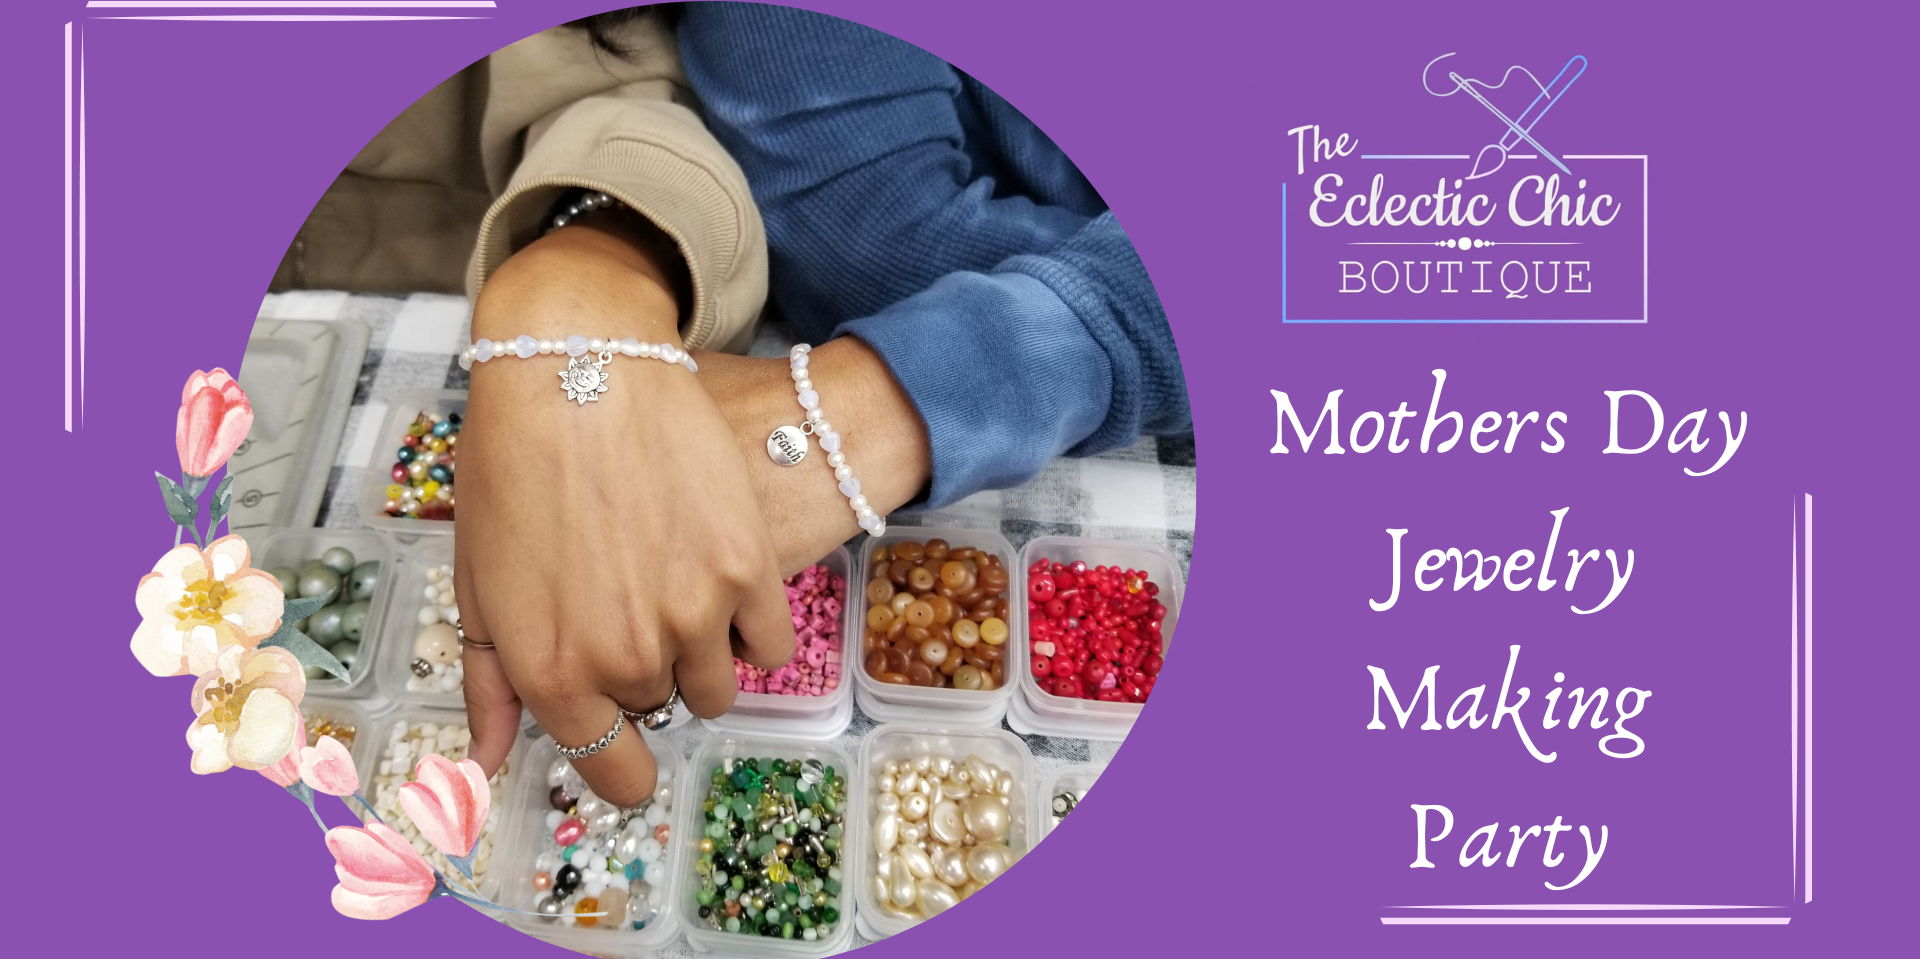 Mothers Day Jewelry Making Party promotional image